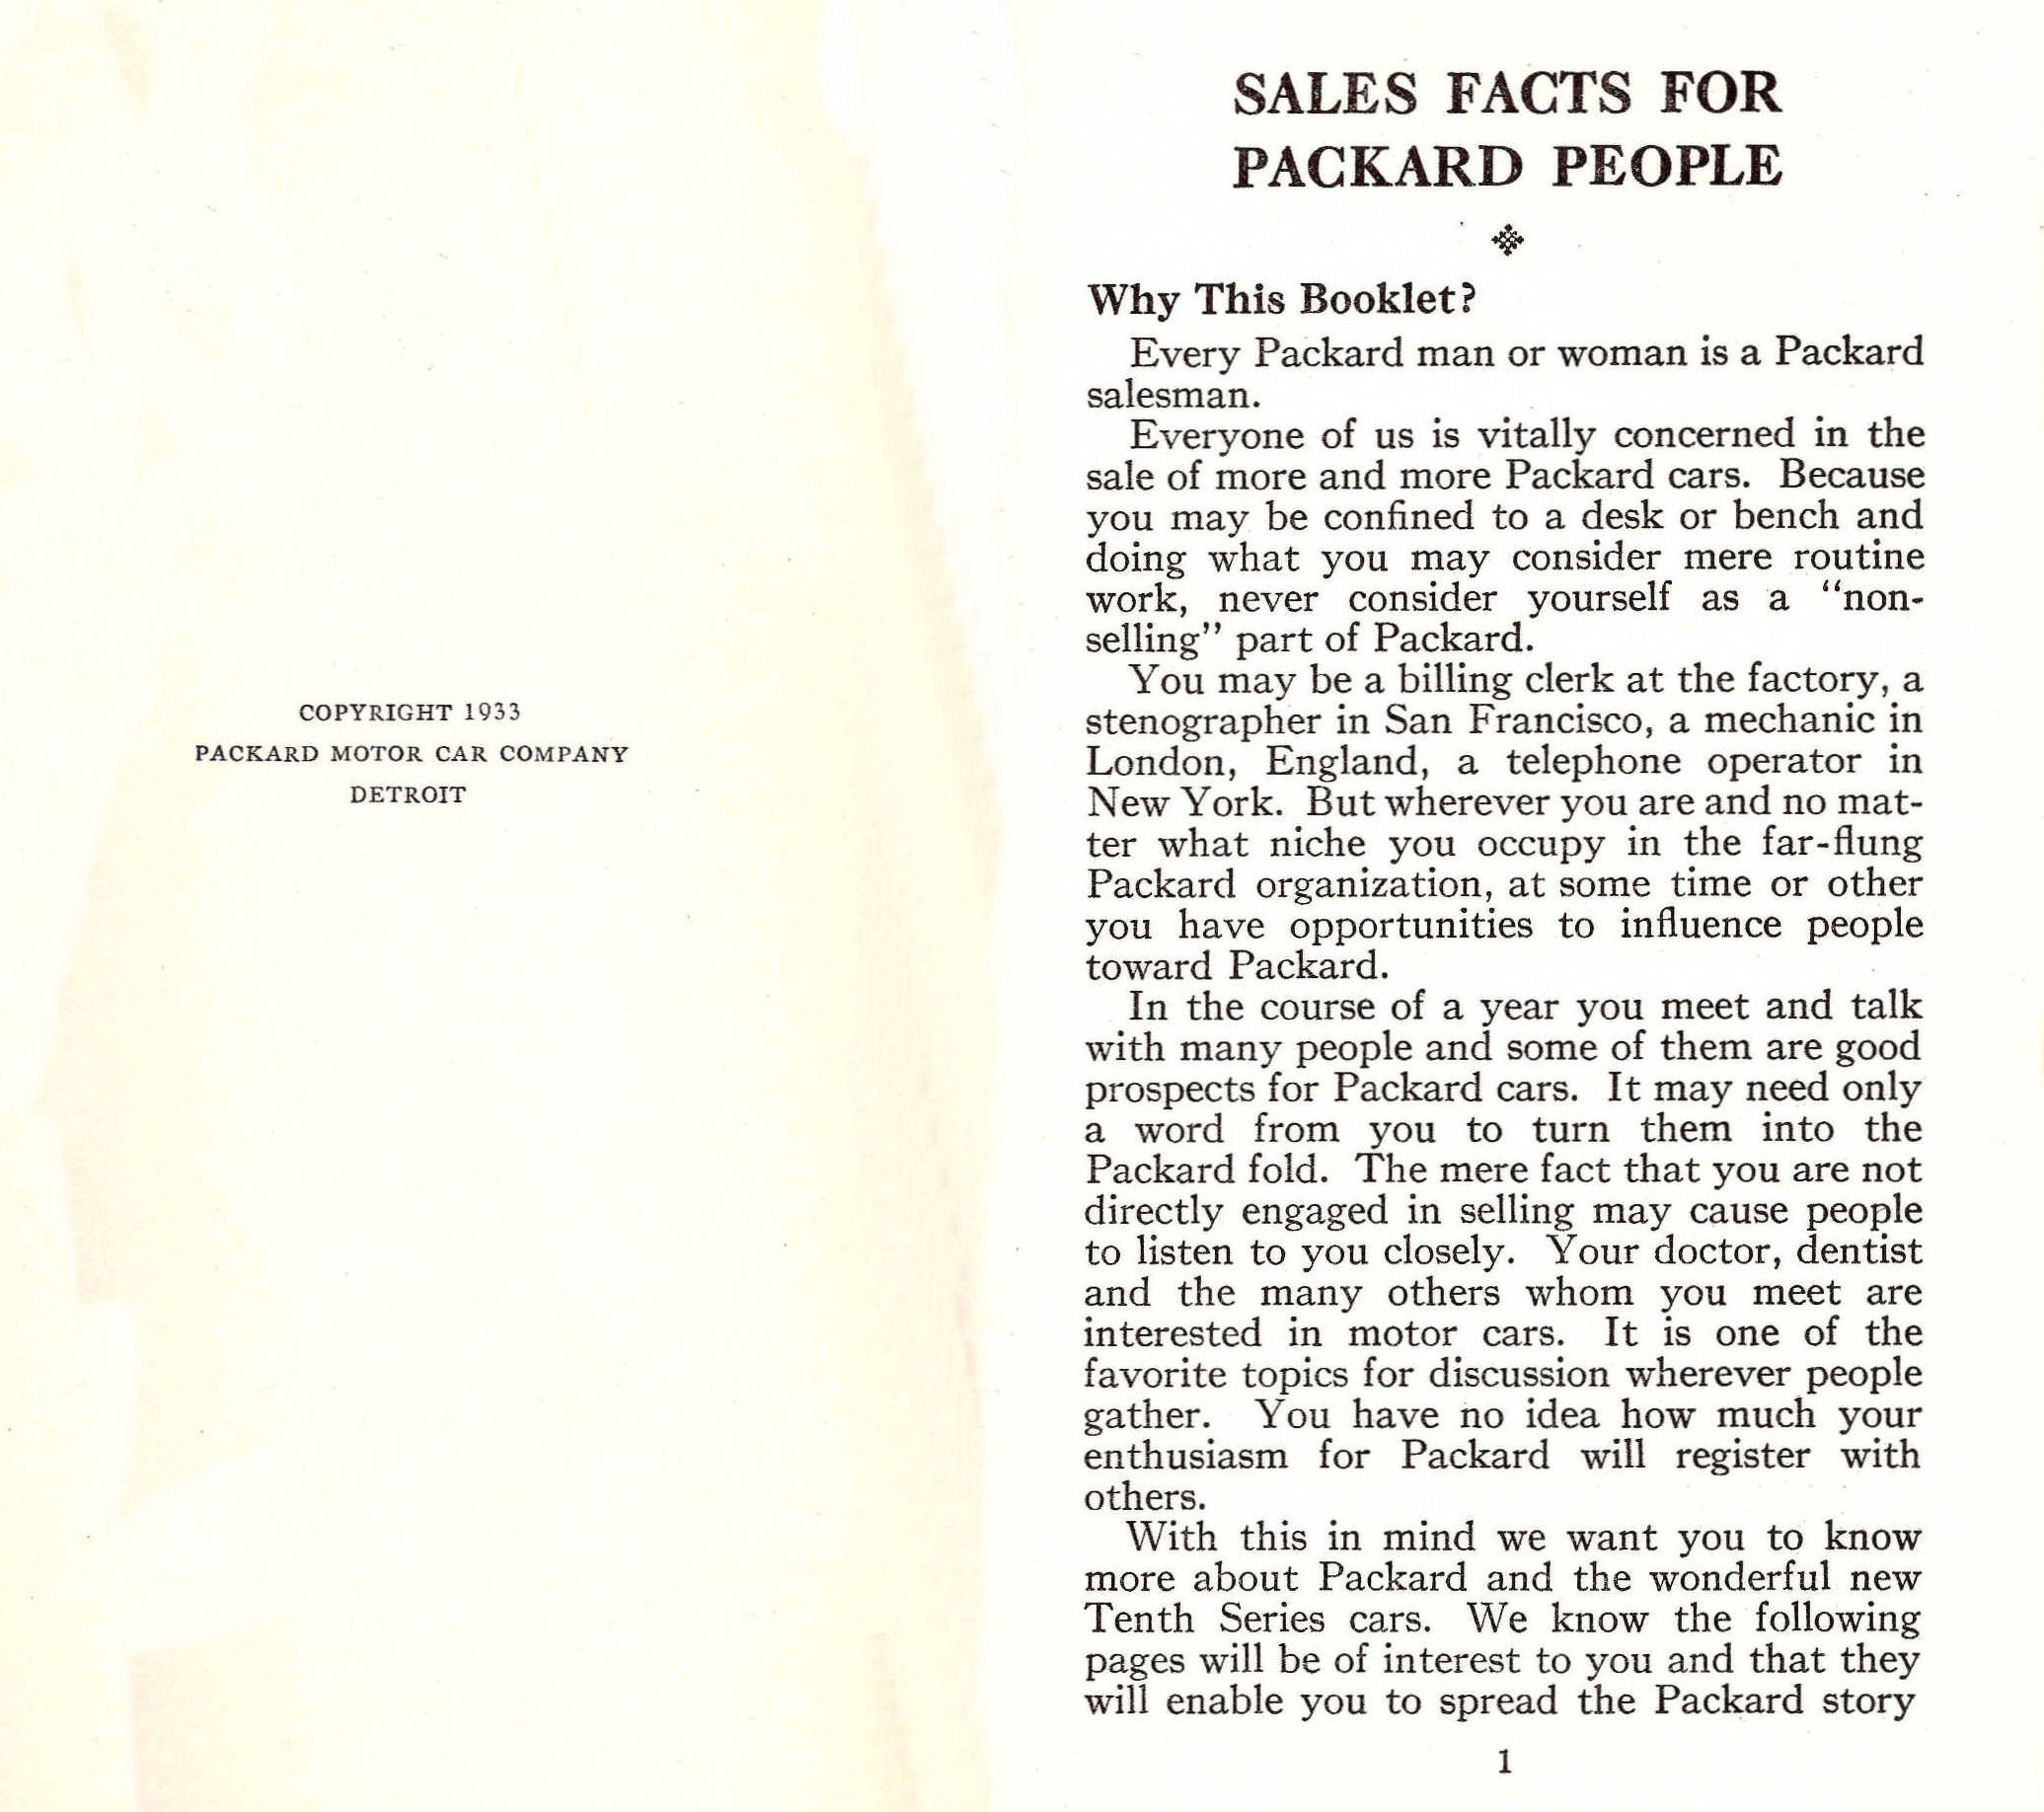 1933_Packard_Facts_Booklet-00a-01